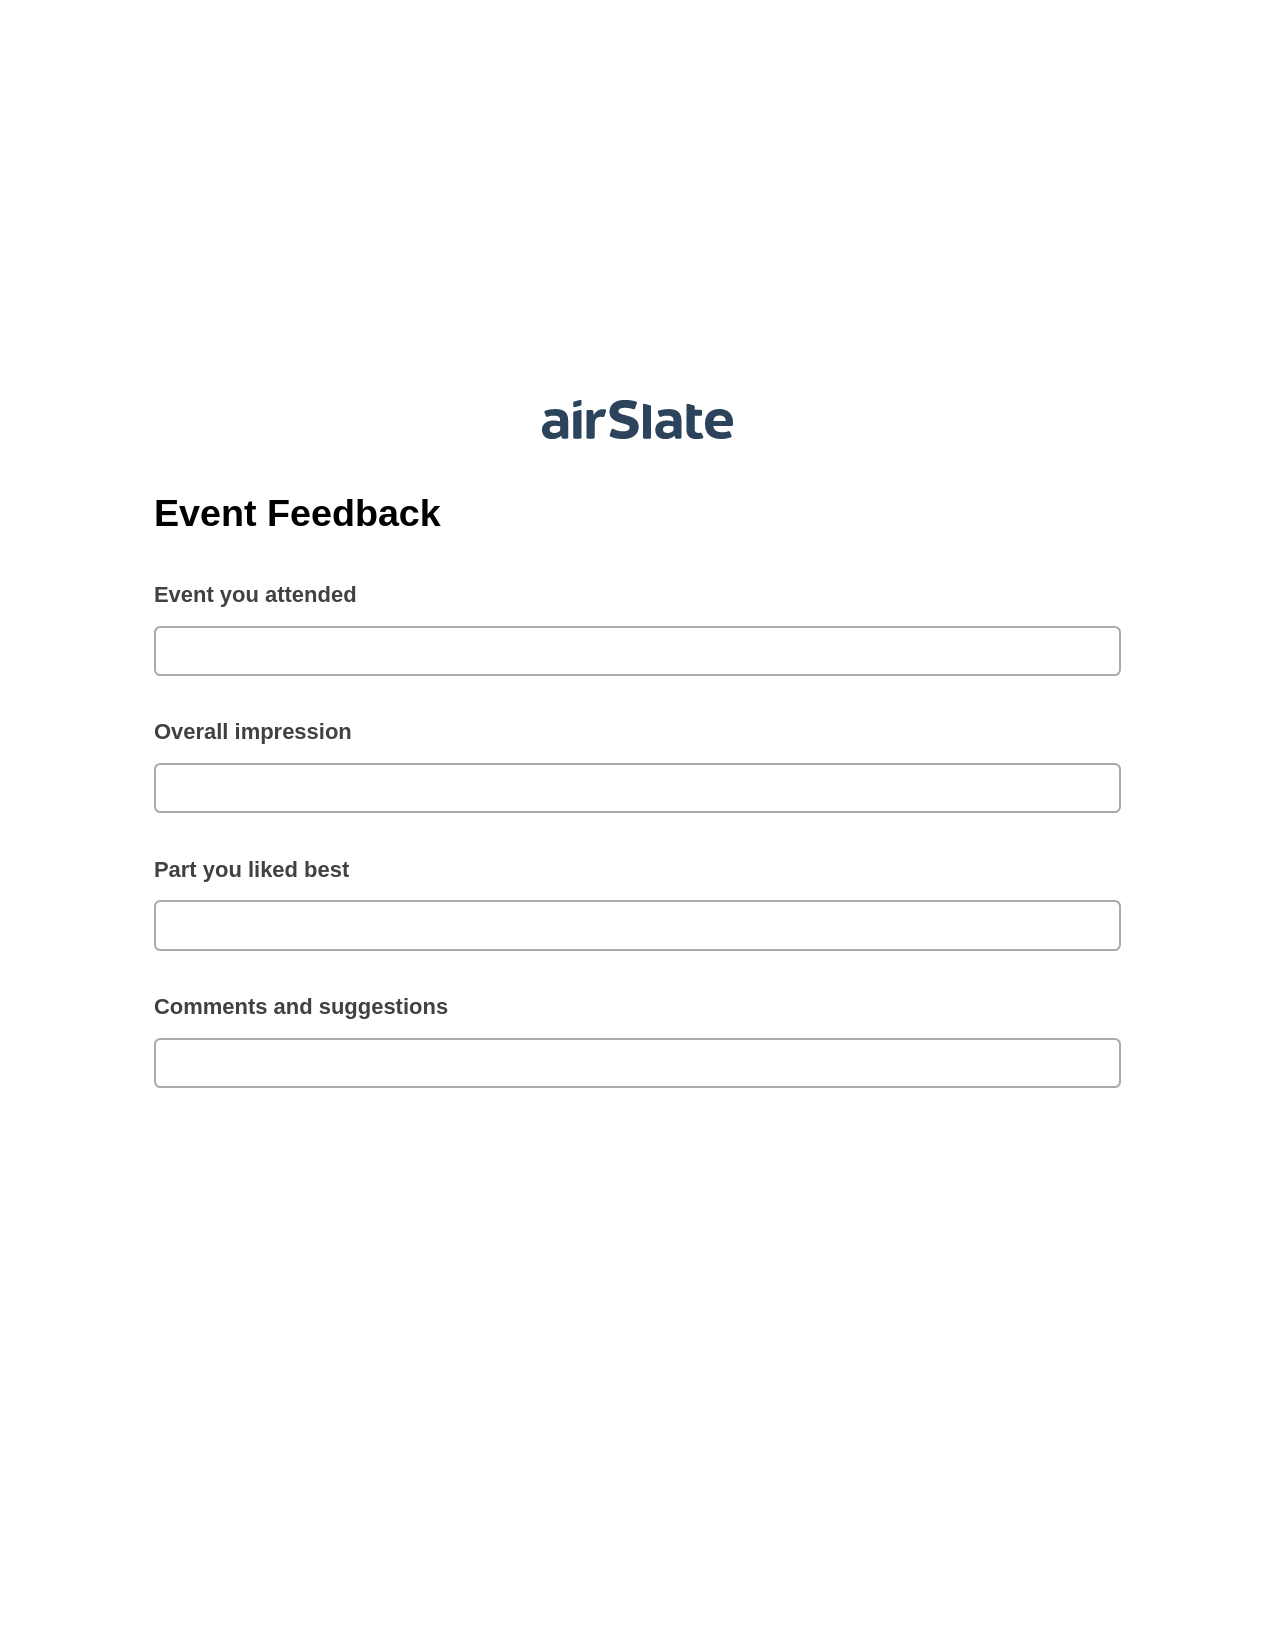 Event Feedback Pre-fill Dropdowns from MySQL Bot, Lock the slate bot, Export to Smartsheet